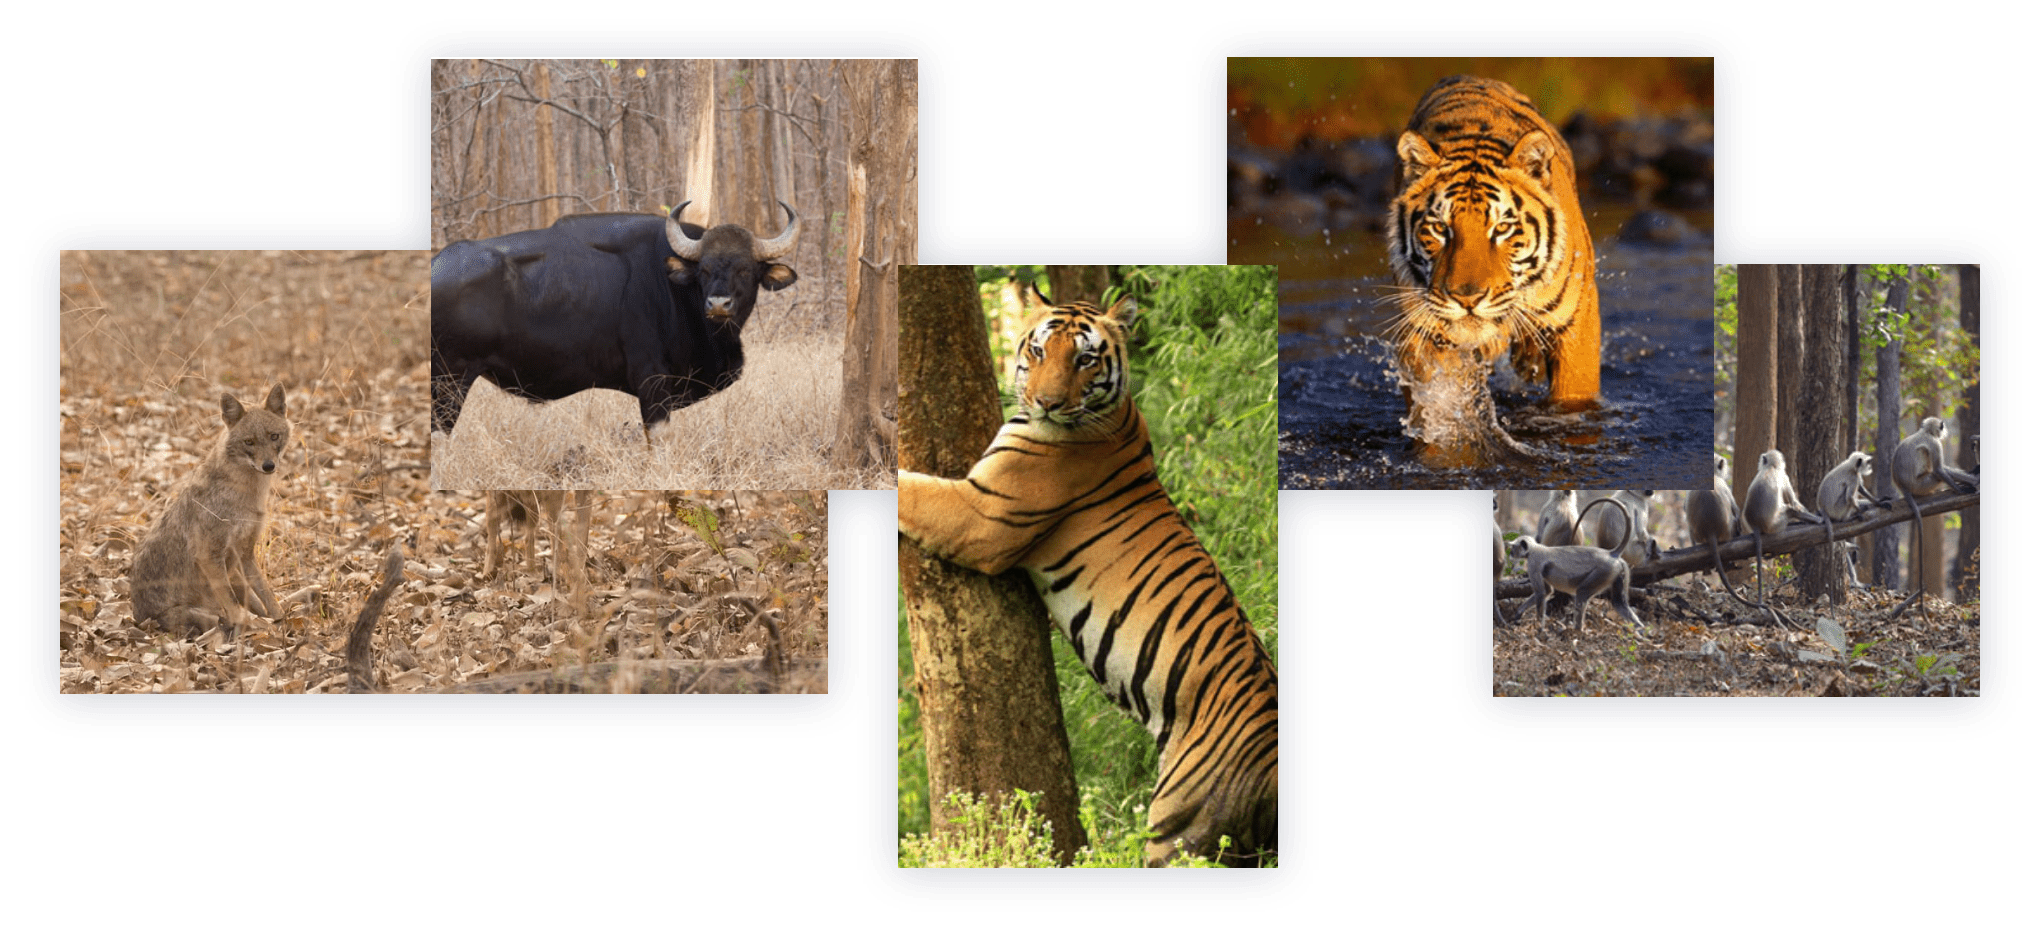 A collage of five wildlife photographs showcasing biodiversity in various ecosystems: 1) A black bull in a forest clearing, 2) Two Jackal in autumn woods, one facing the camera, 3) Close-up of a tiger’s face with green foliage background, 4) A tiger splashing through water, and 5) A group of monkeys on grass and a wooden fence.